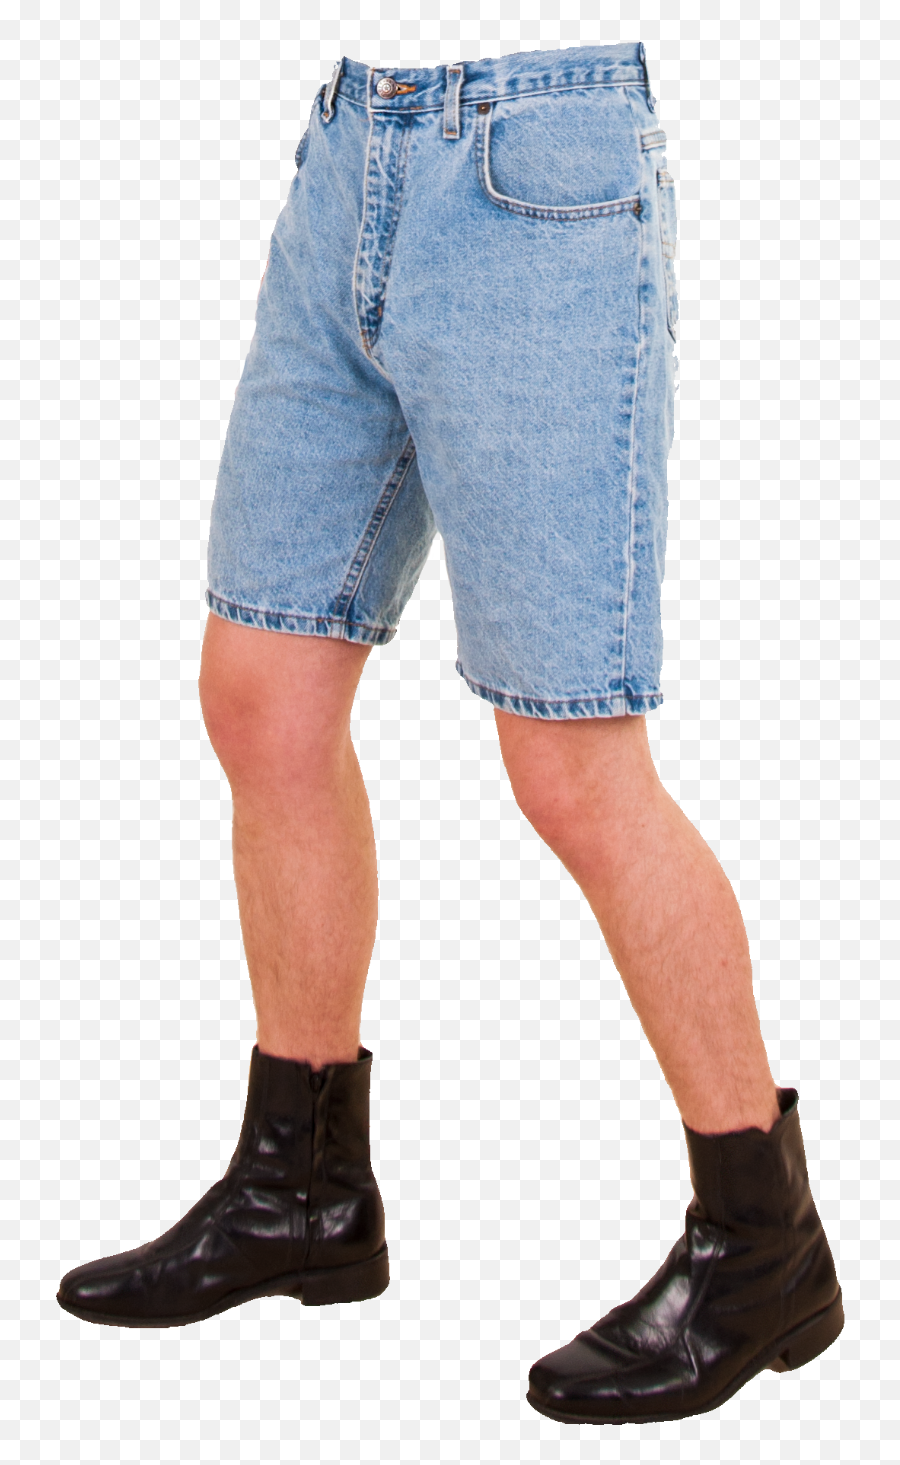 A Pair Of Legs In Jean Shorts With - Legs Transparent Background Png,Legs Transparent